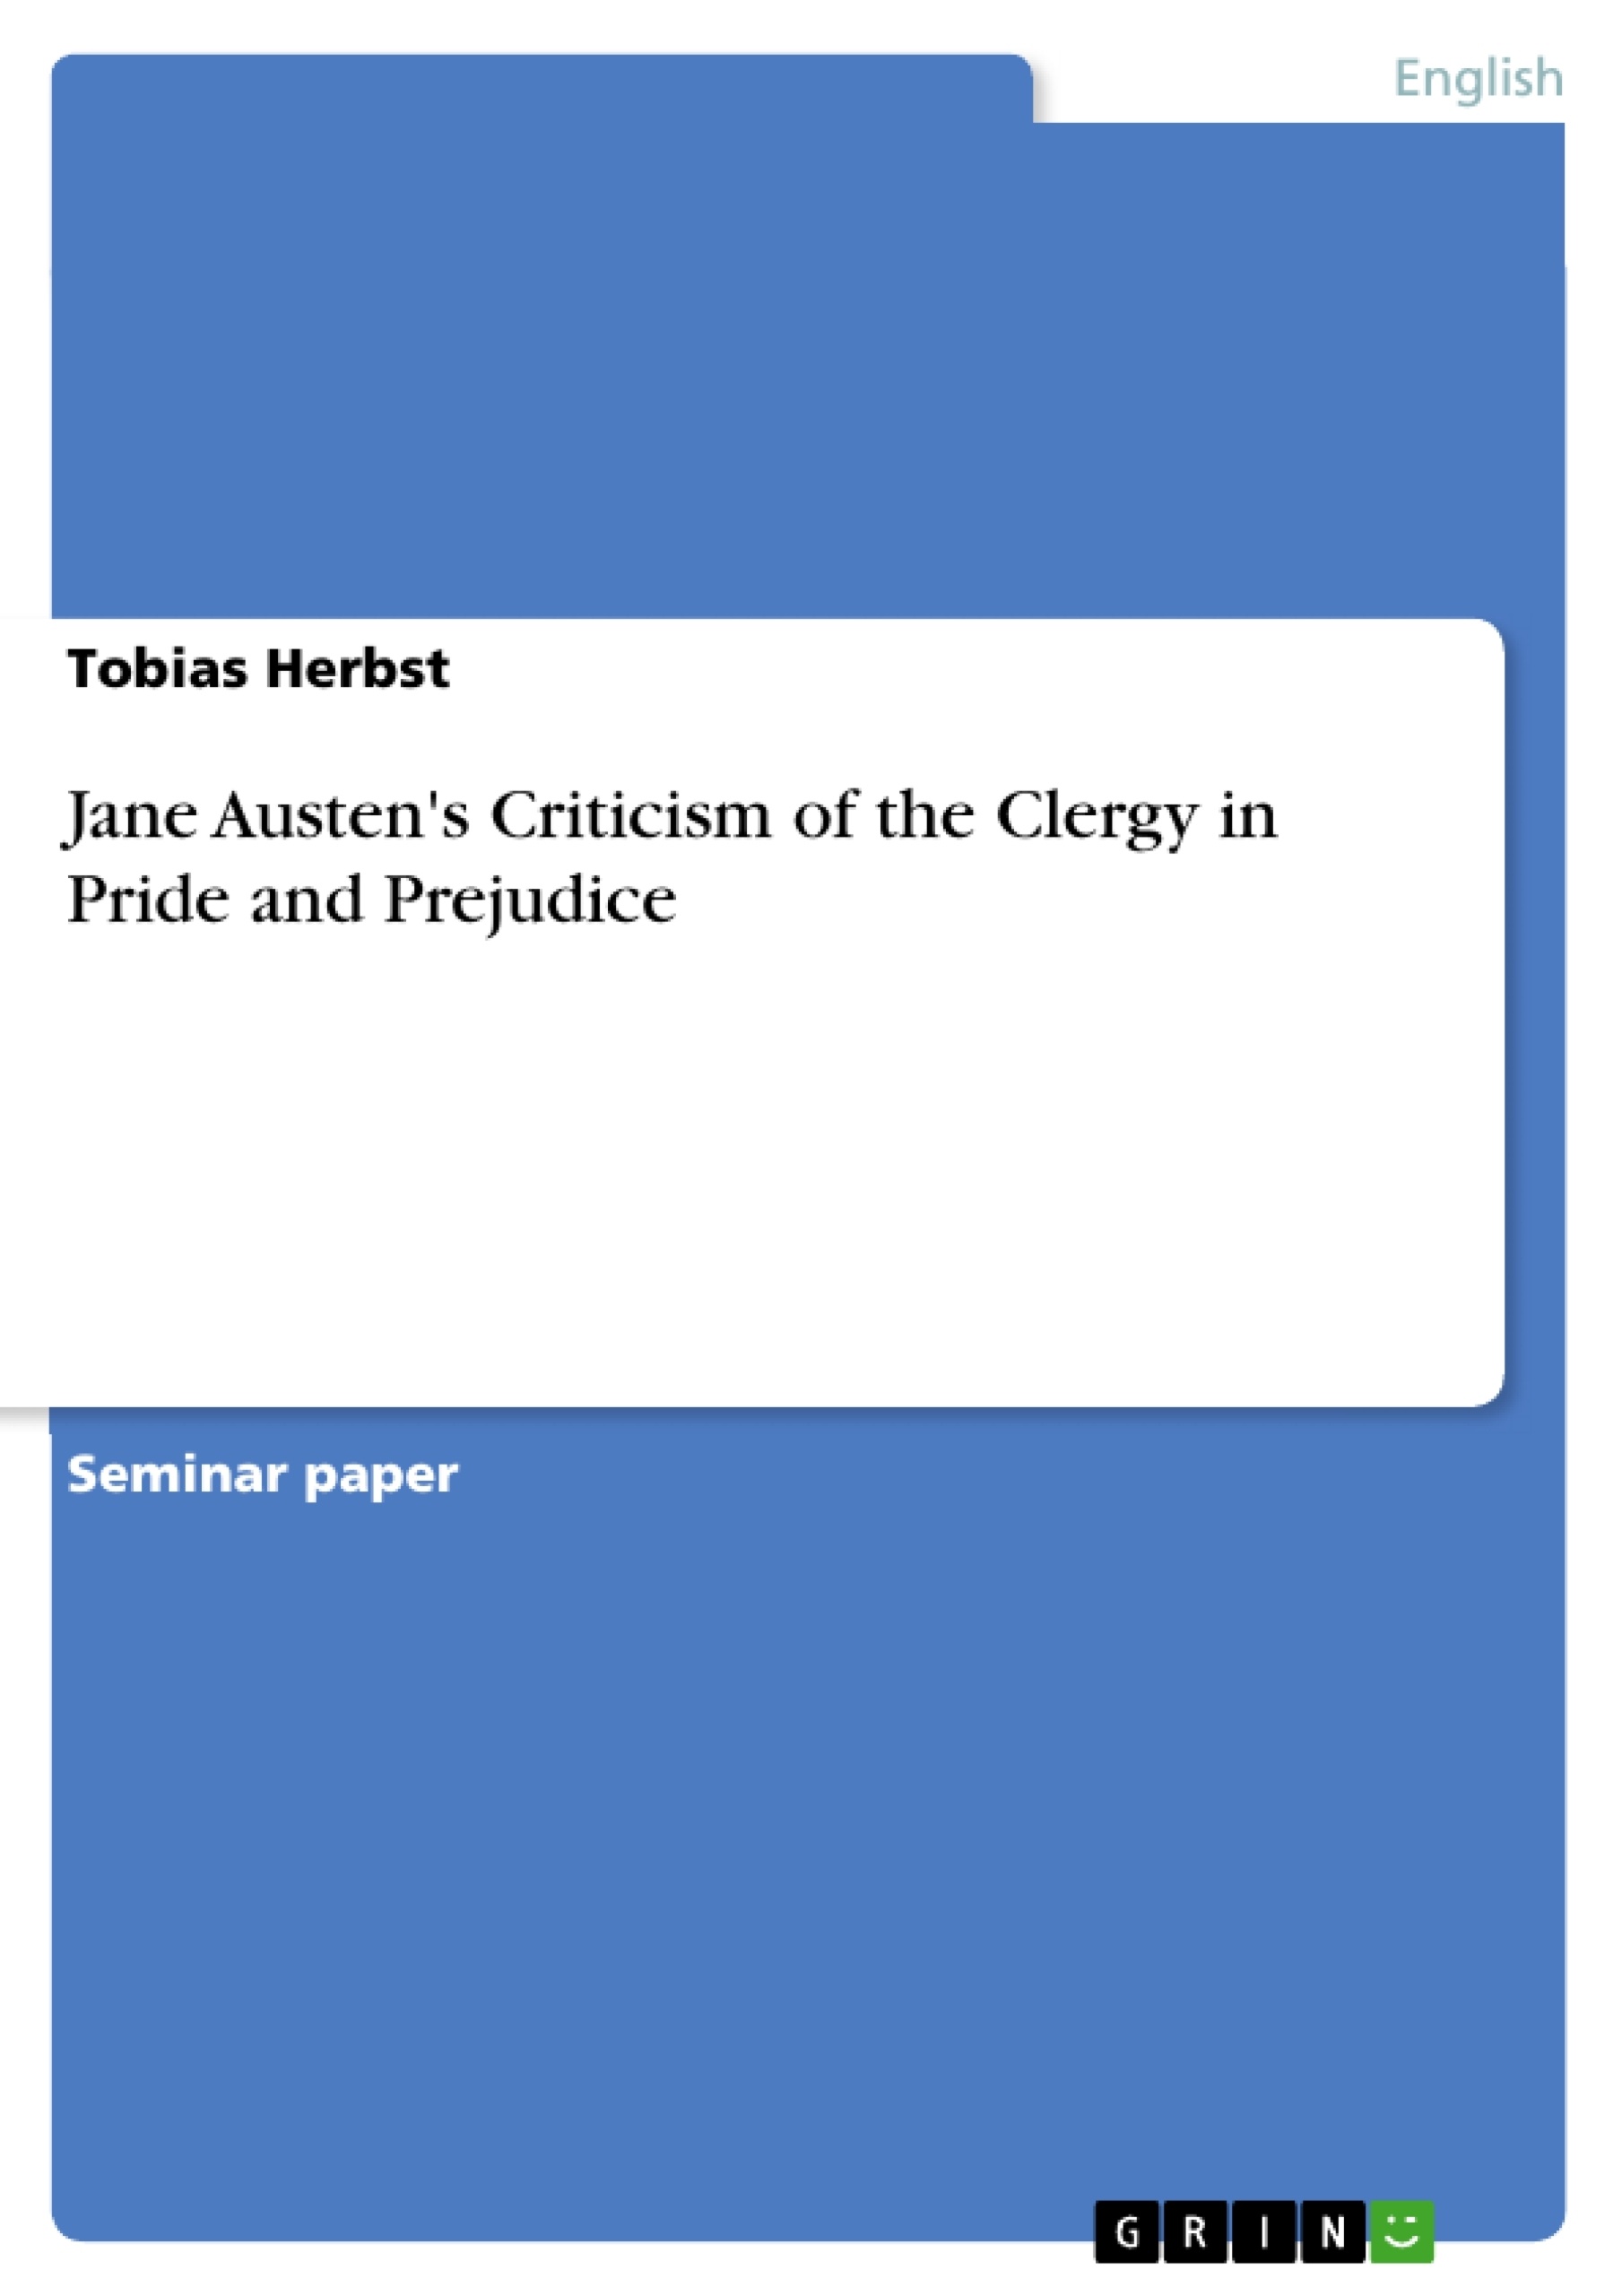 Titre: Jane Austen's Criticism of the Clergy in Pride and Prejudice